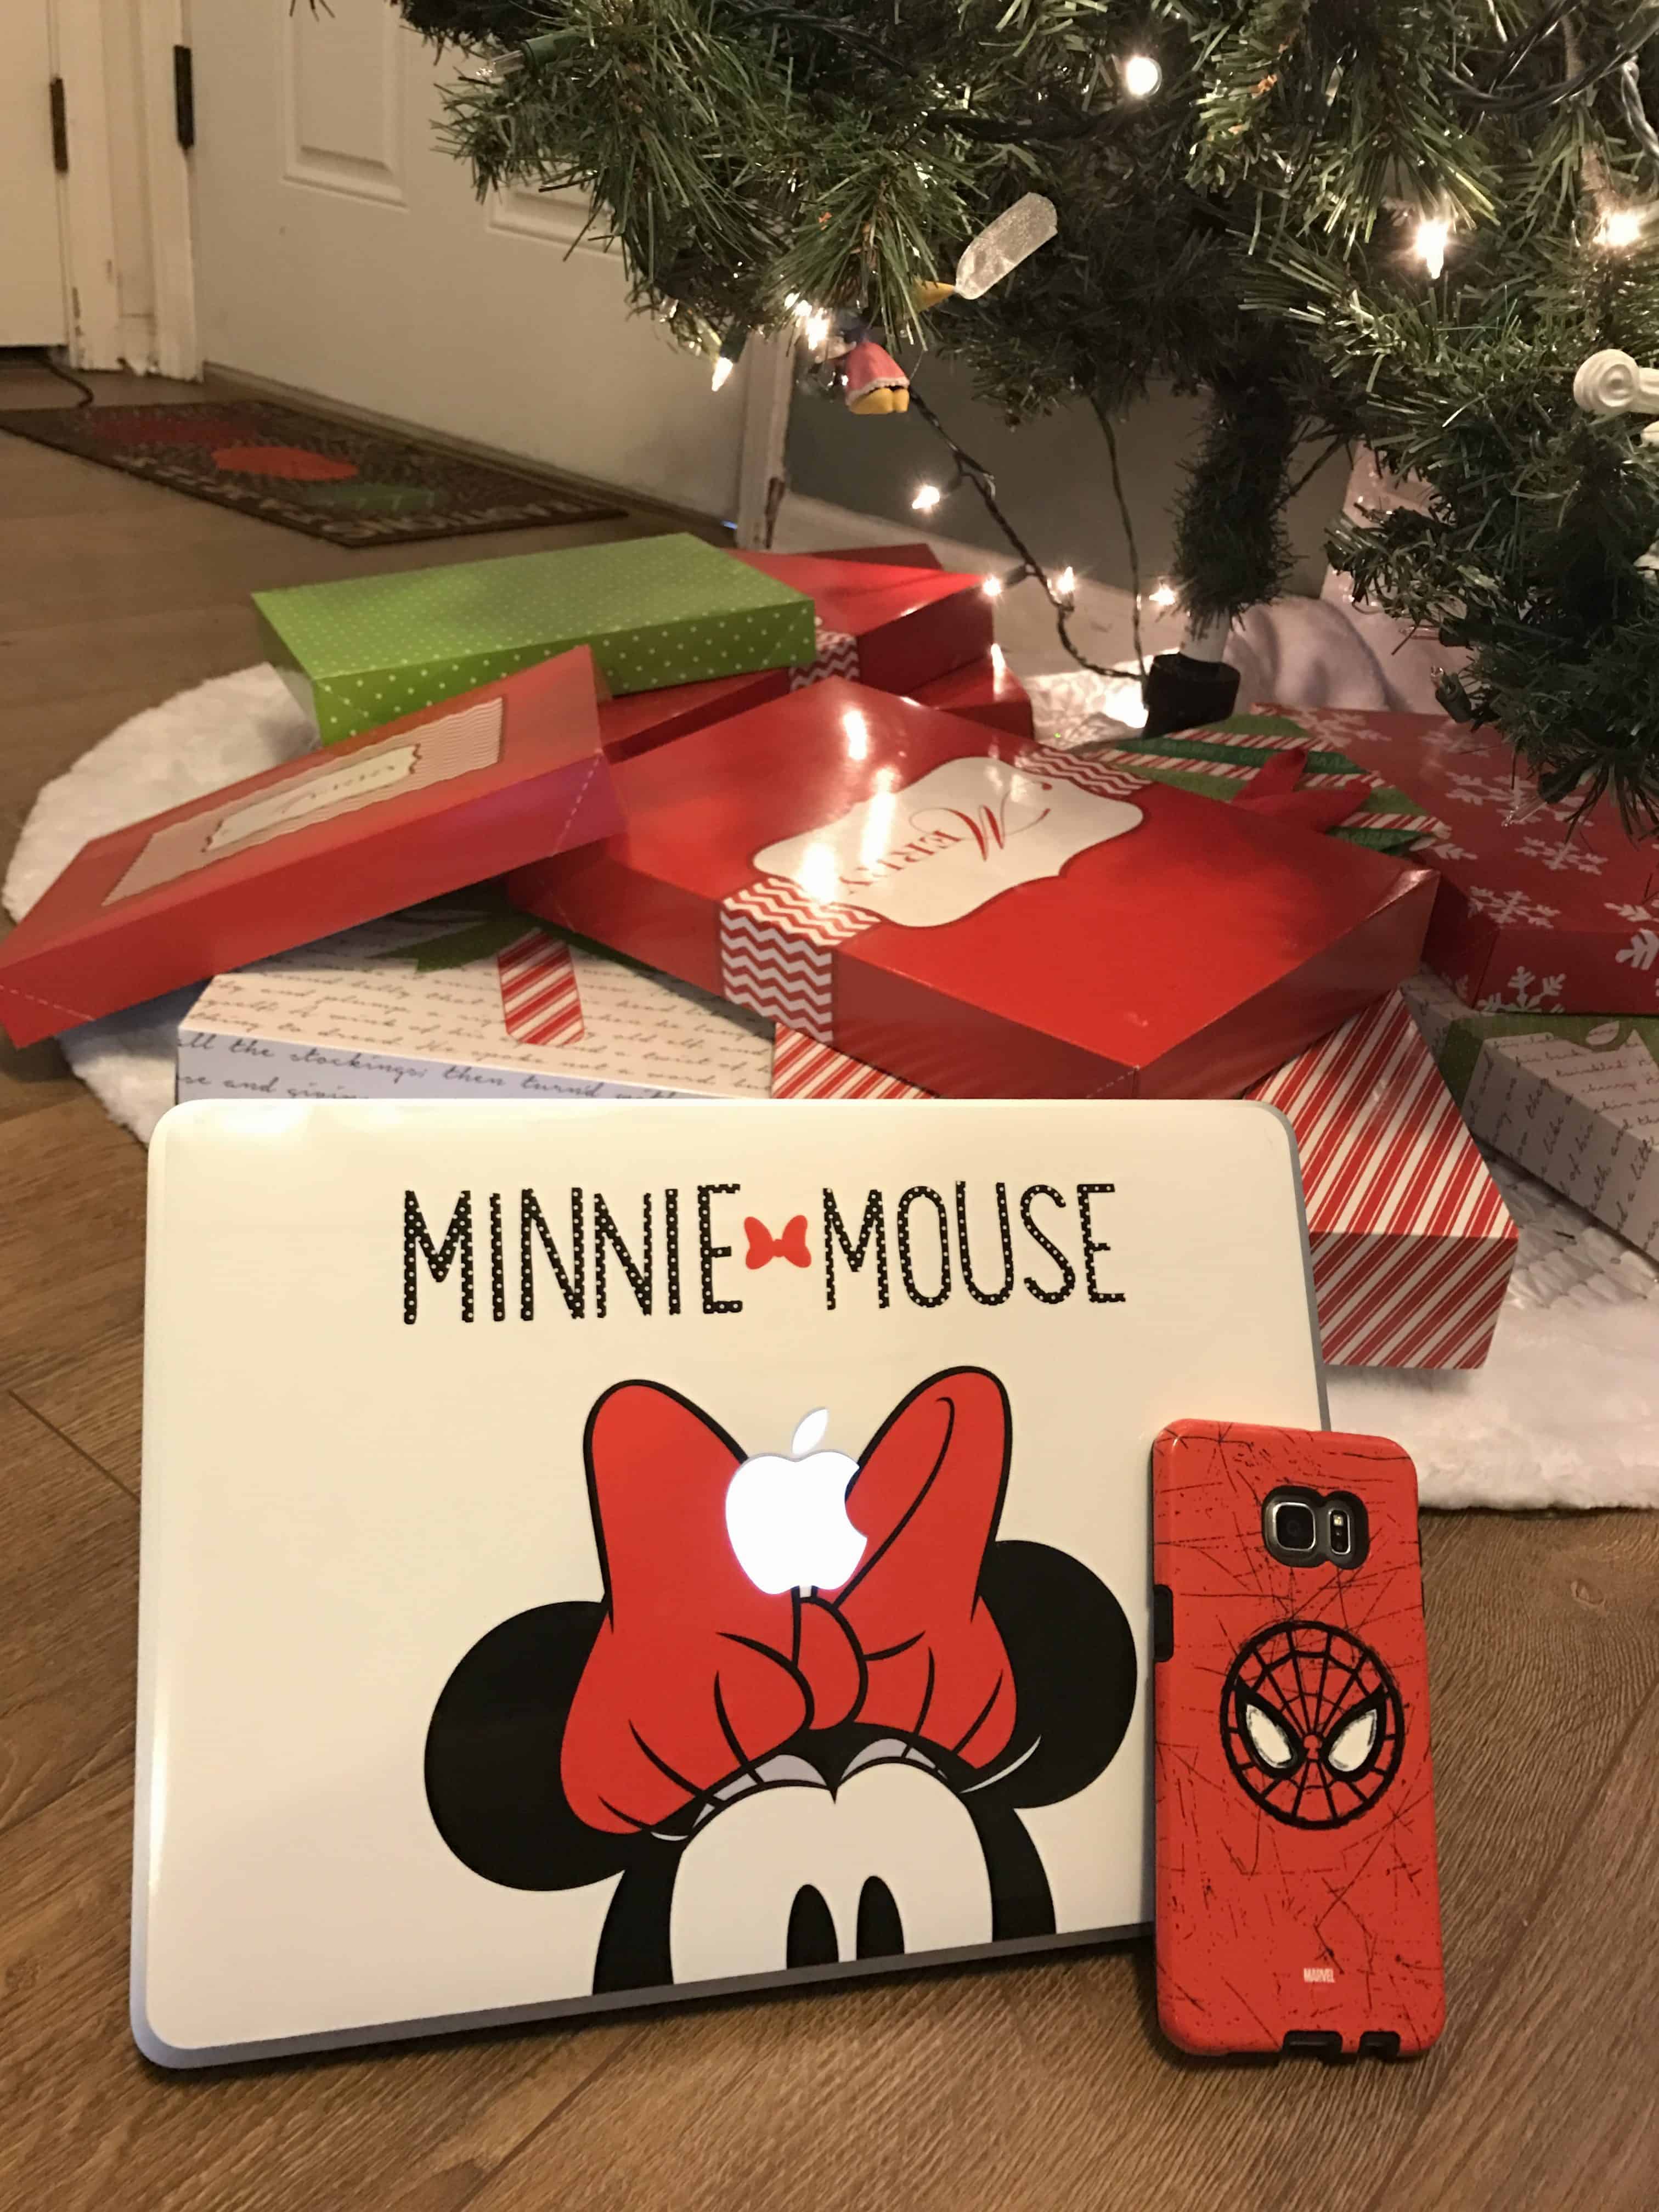 Skinit Spider Man Galaxy S6 Case and Minnie Mouse Macbook Skin - #EBHolidayGiftGuide